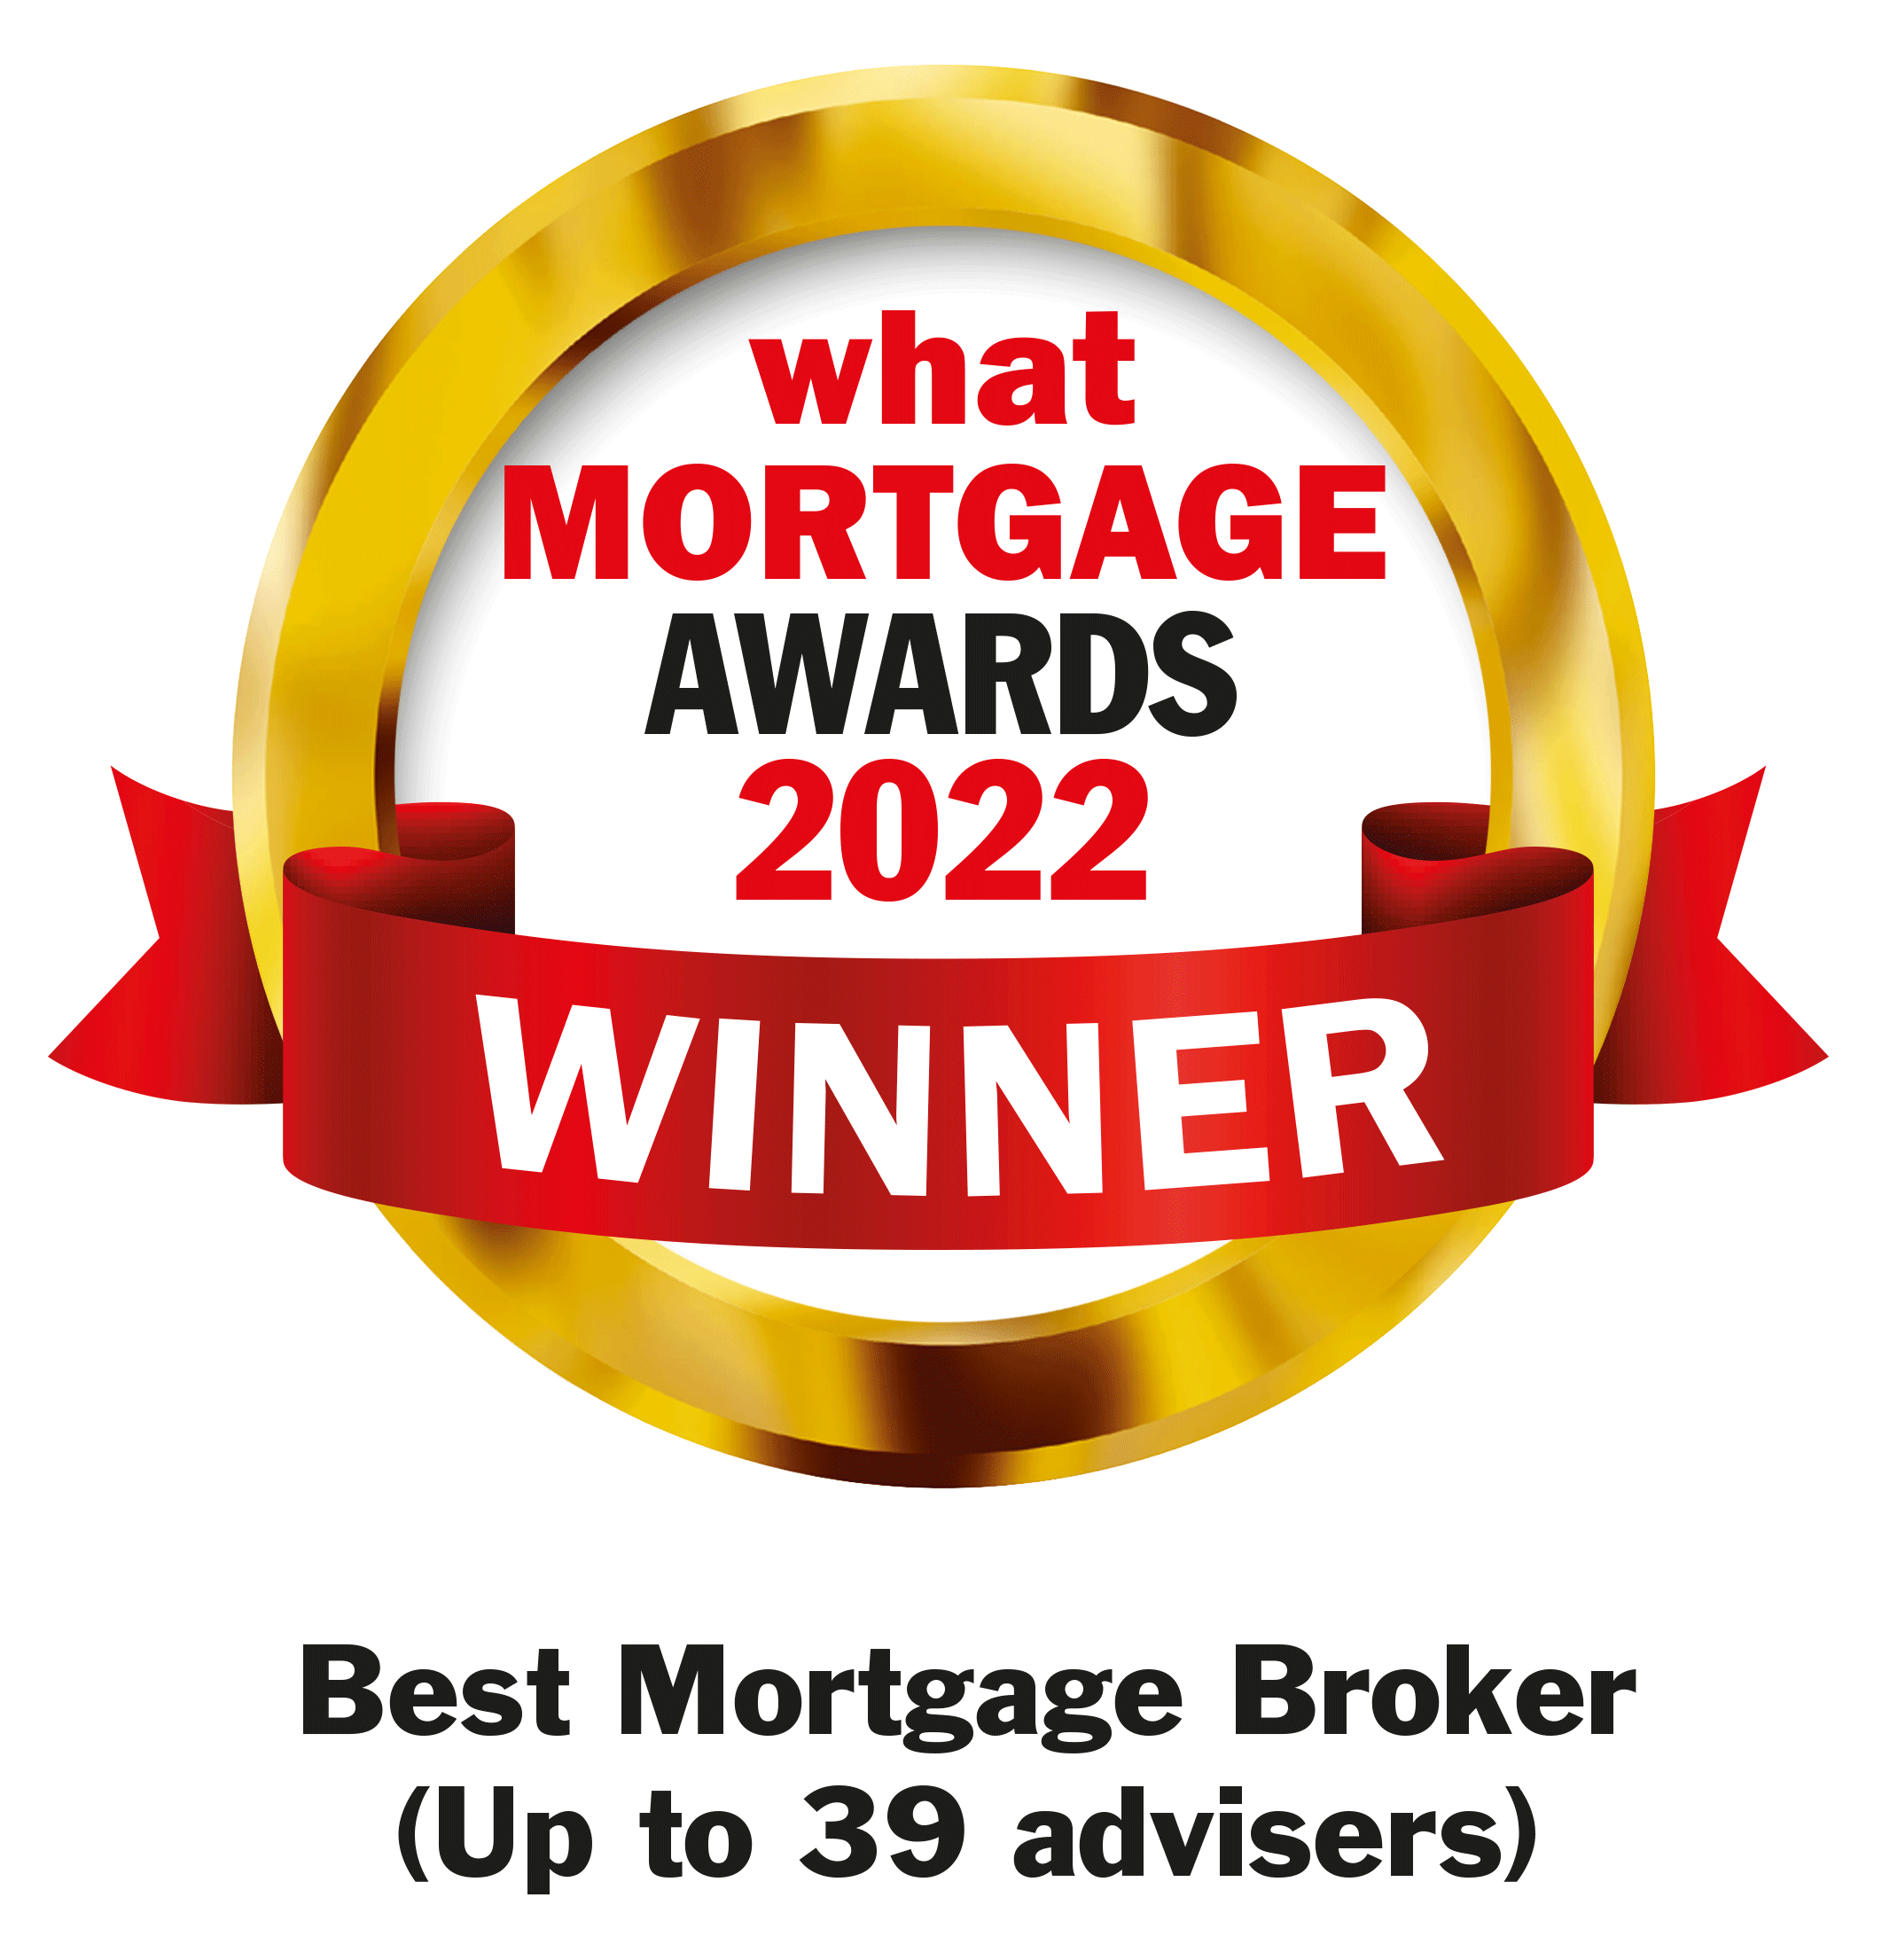 What Mortgage Awards 2022